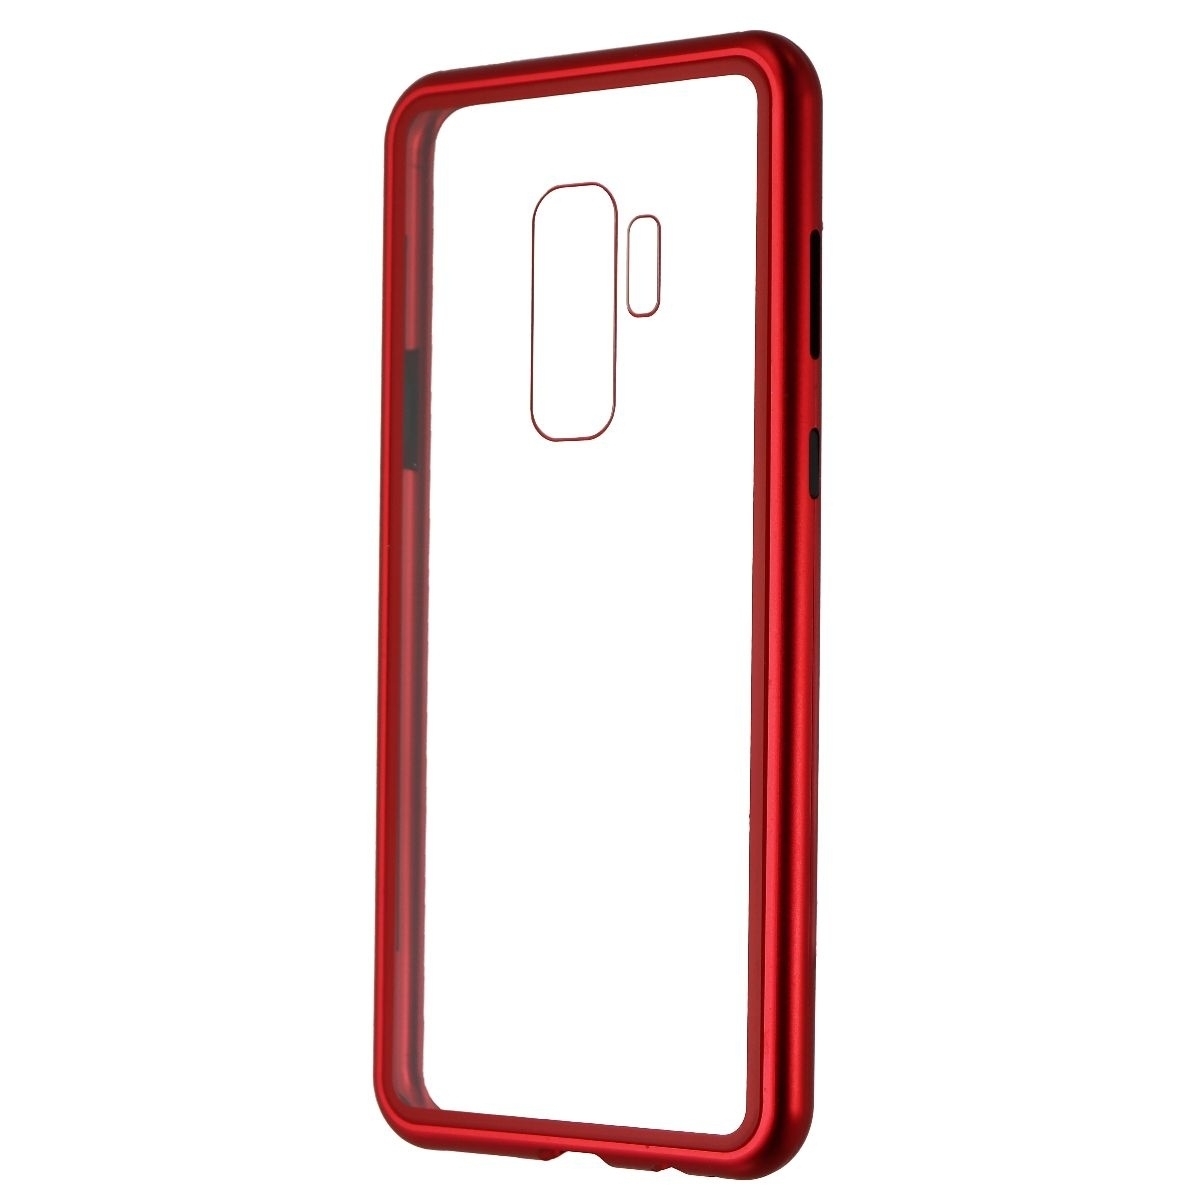 Zore Hybrid Glass Series Case For Samsung Galaxy S9 Plus - Clear/Red